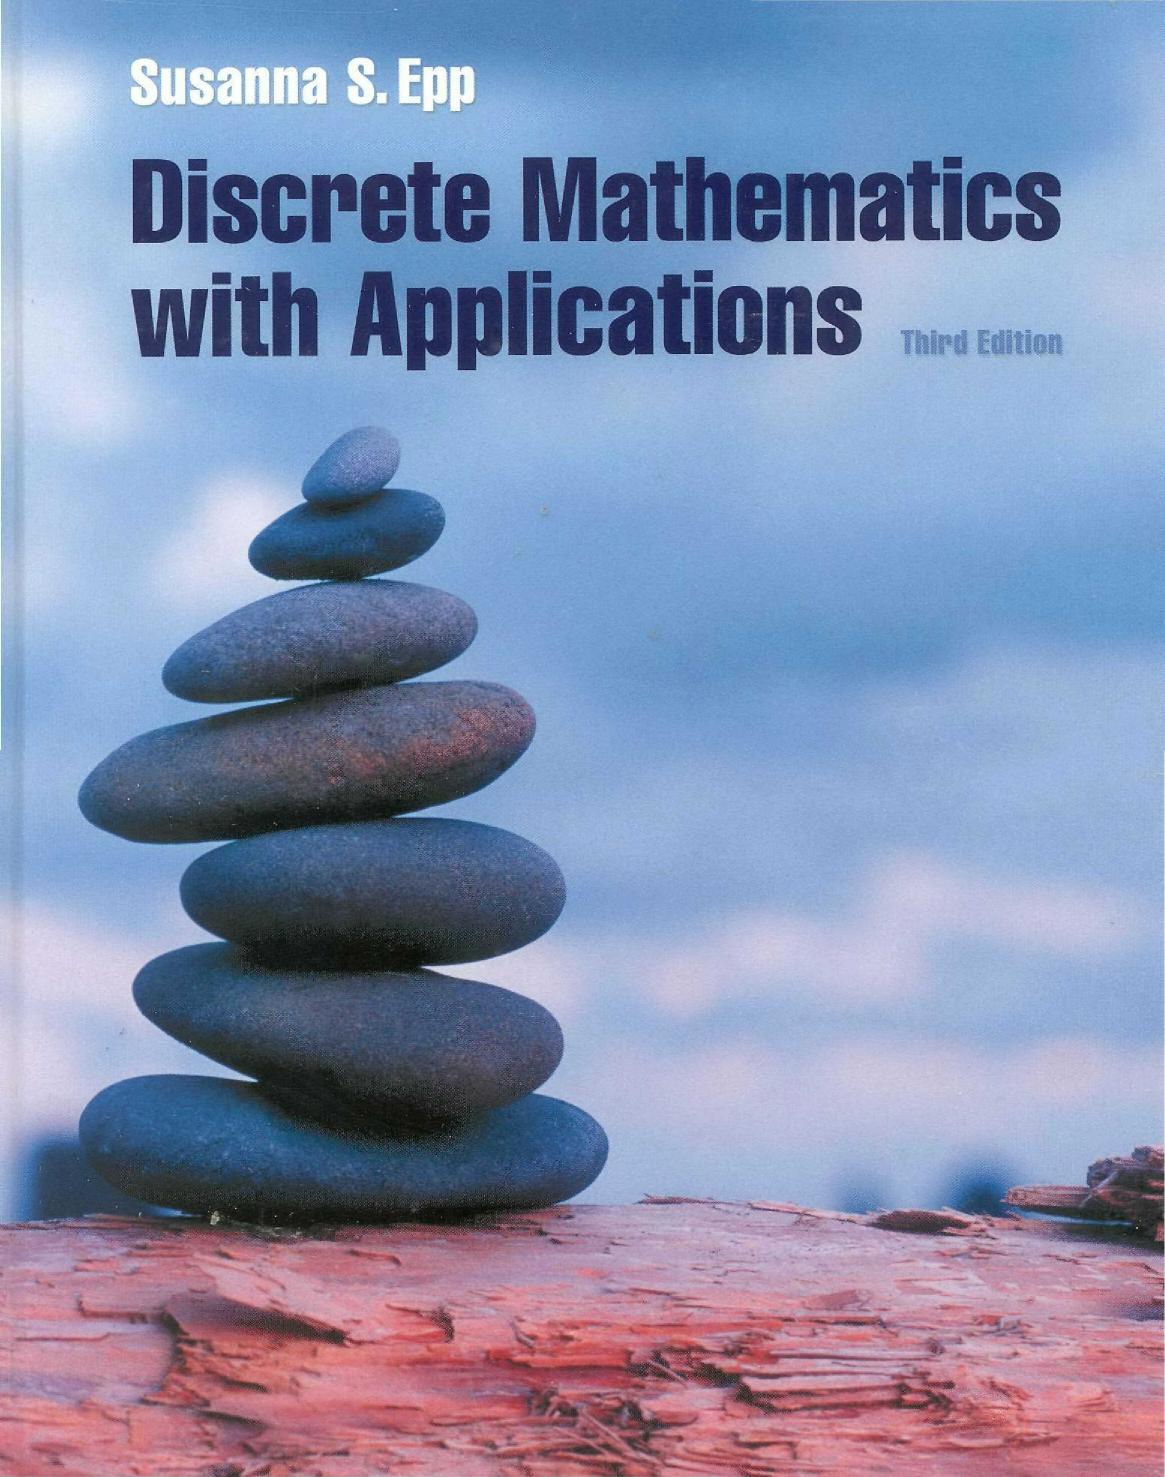 Instructor's Manual for Discrete Mathematics with Applications, Third Edition